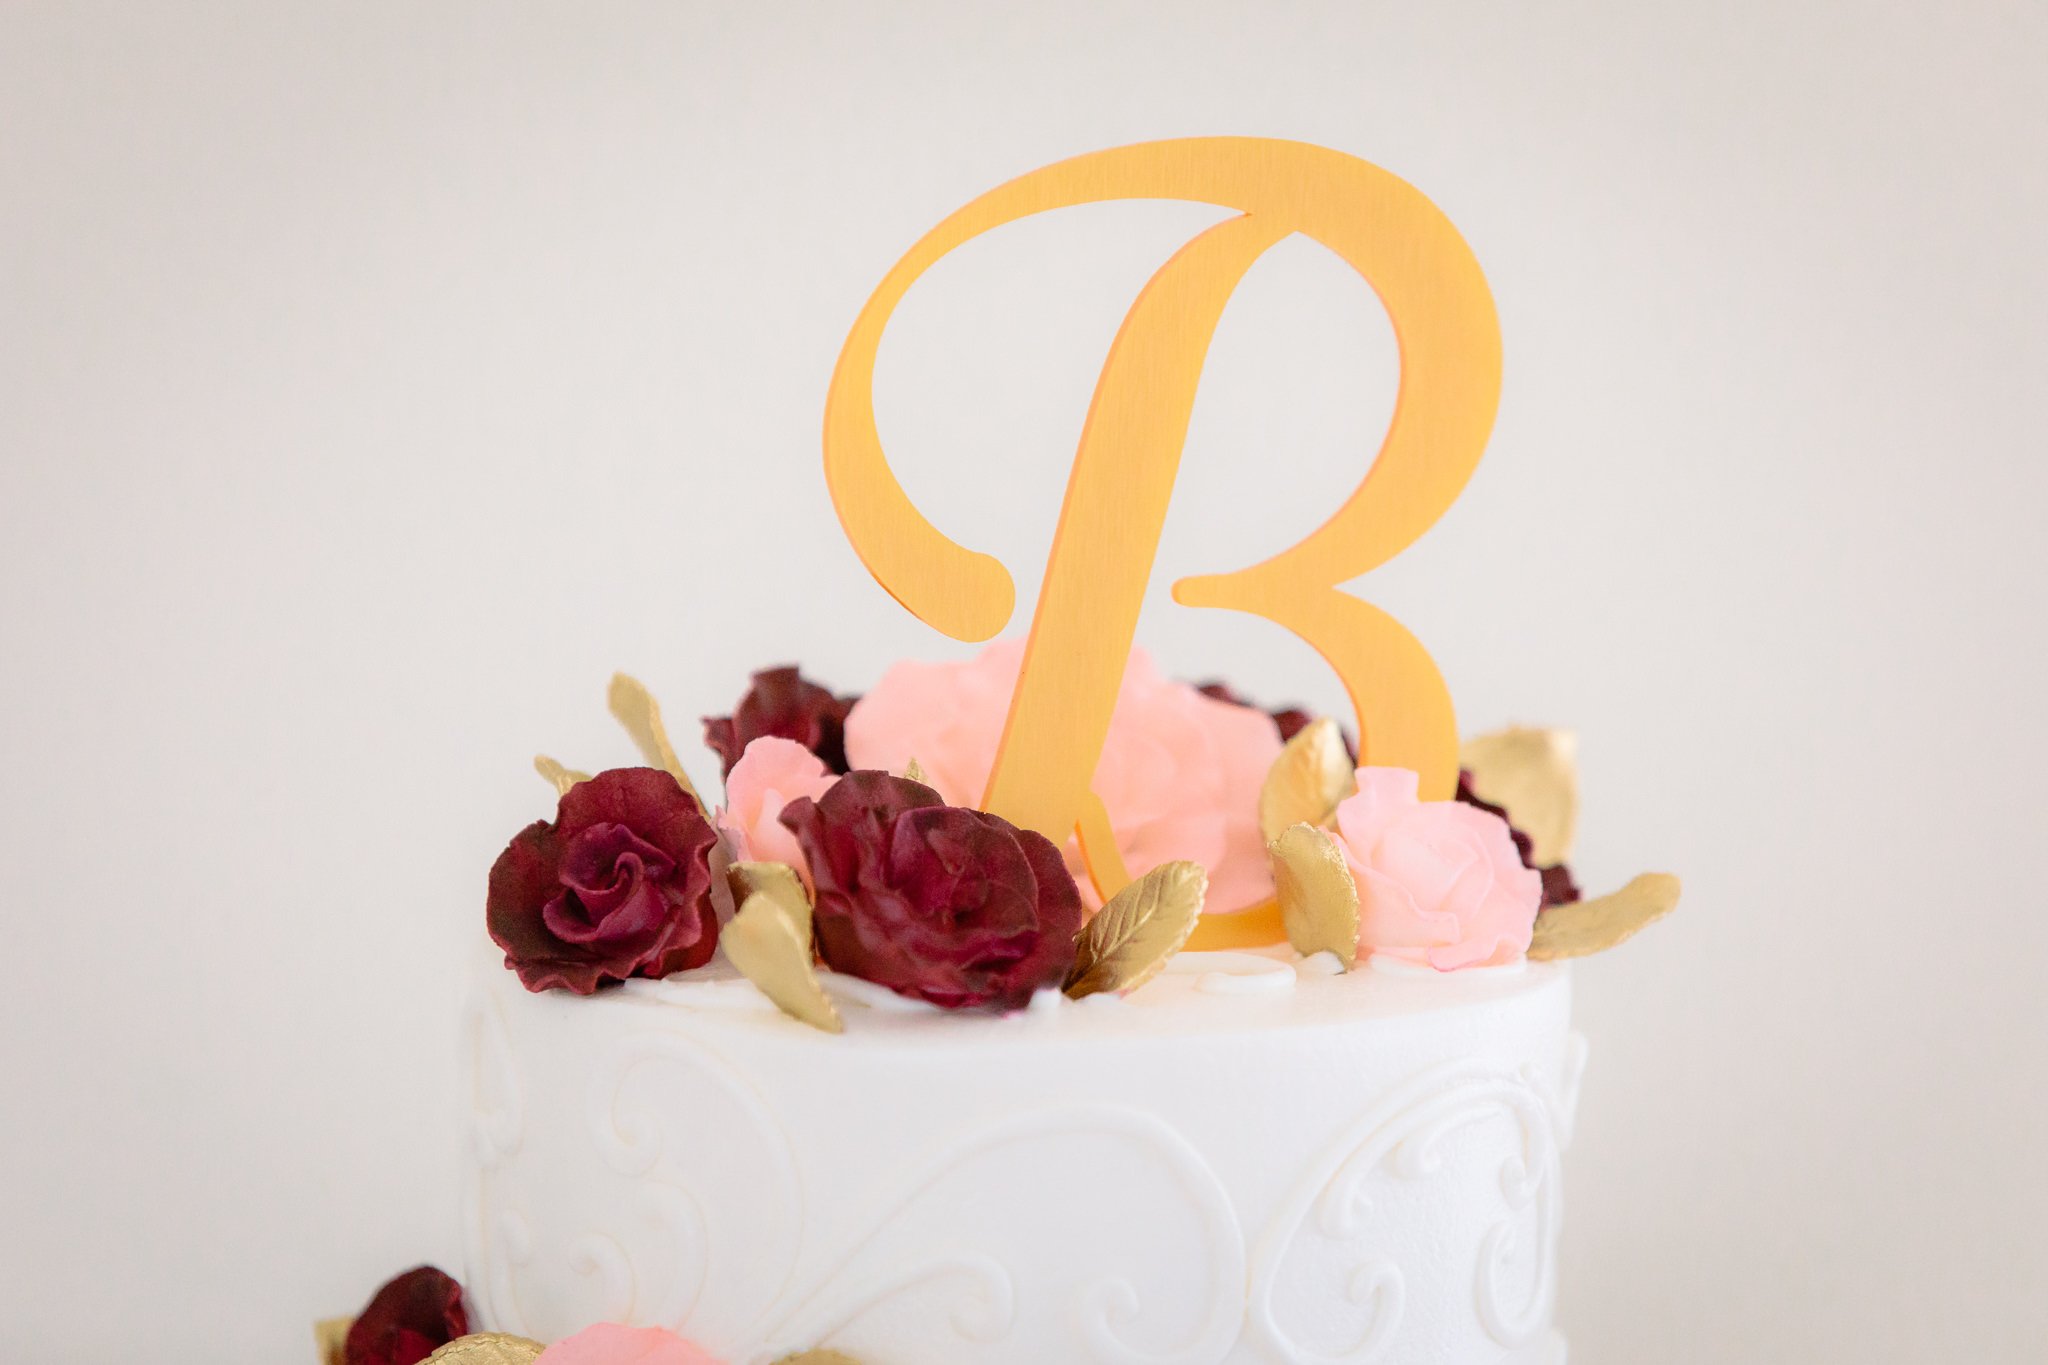 Monogram and floral cake topper on a wedding cake by Oakmont Bakery at Greystone Fields